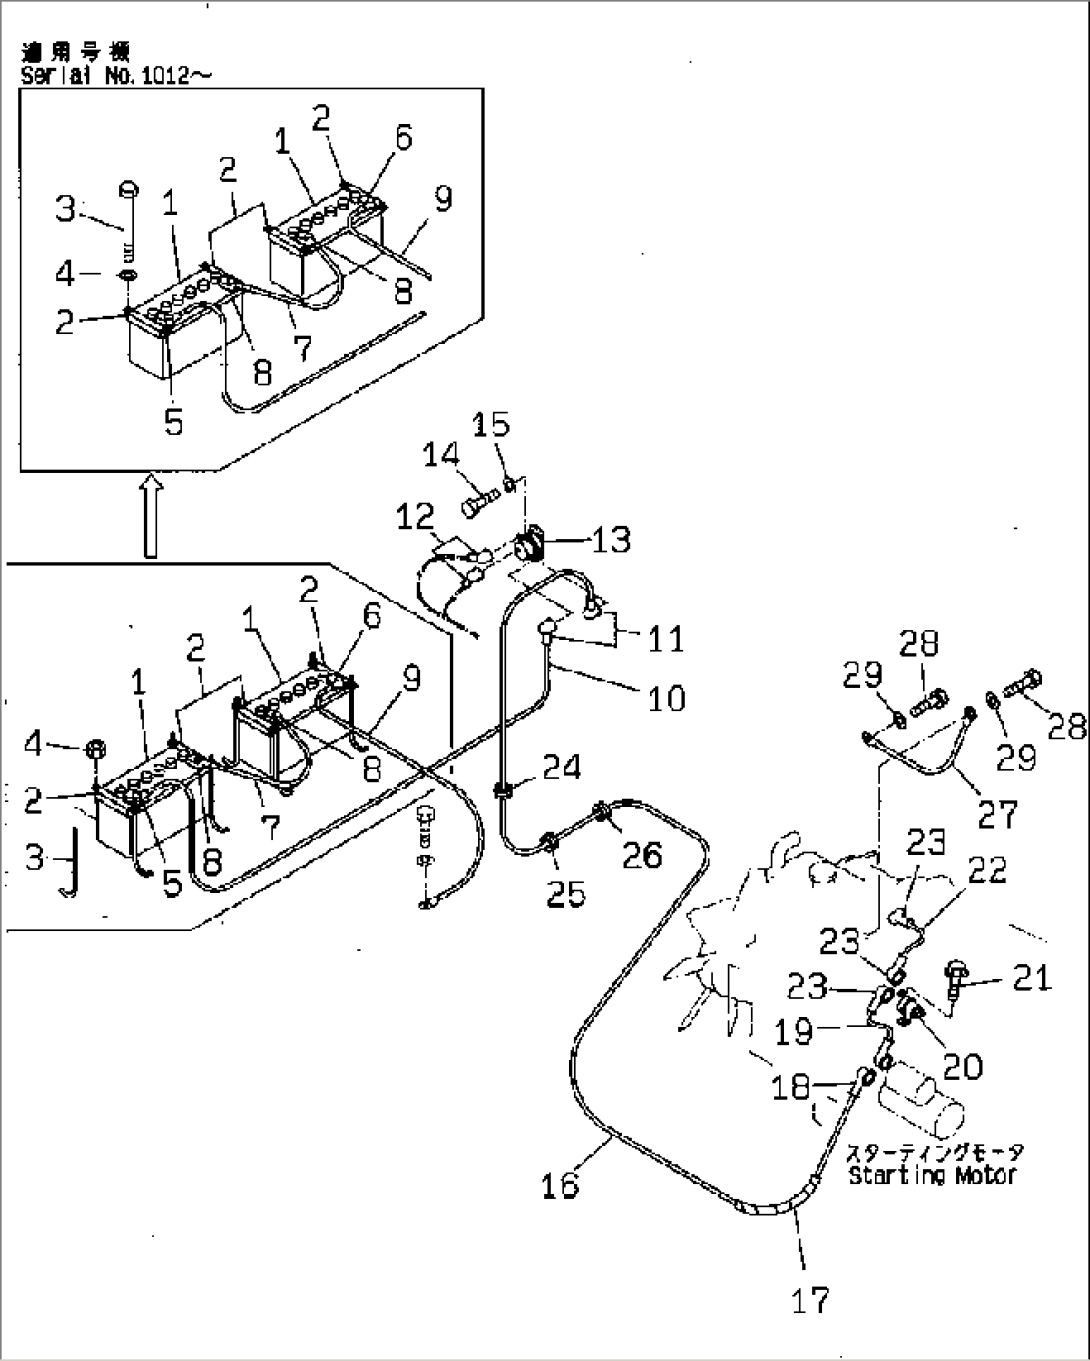 ELECTRICAL SYSTEM (2/3) (BATTERY AND WIRING (BATTERY TO ENGINE))(#1001-1100)